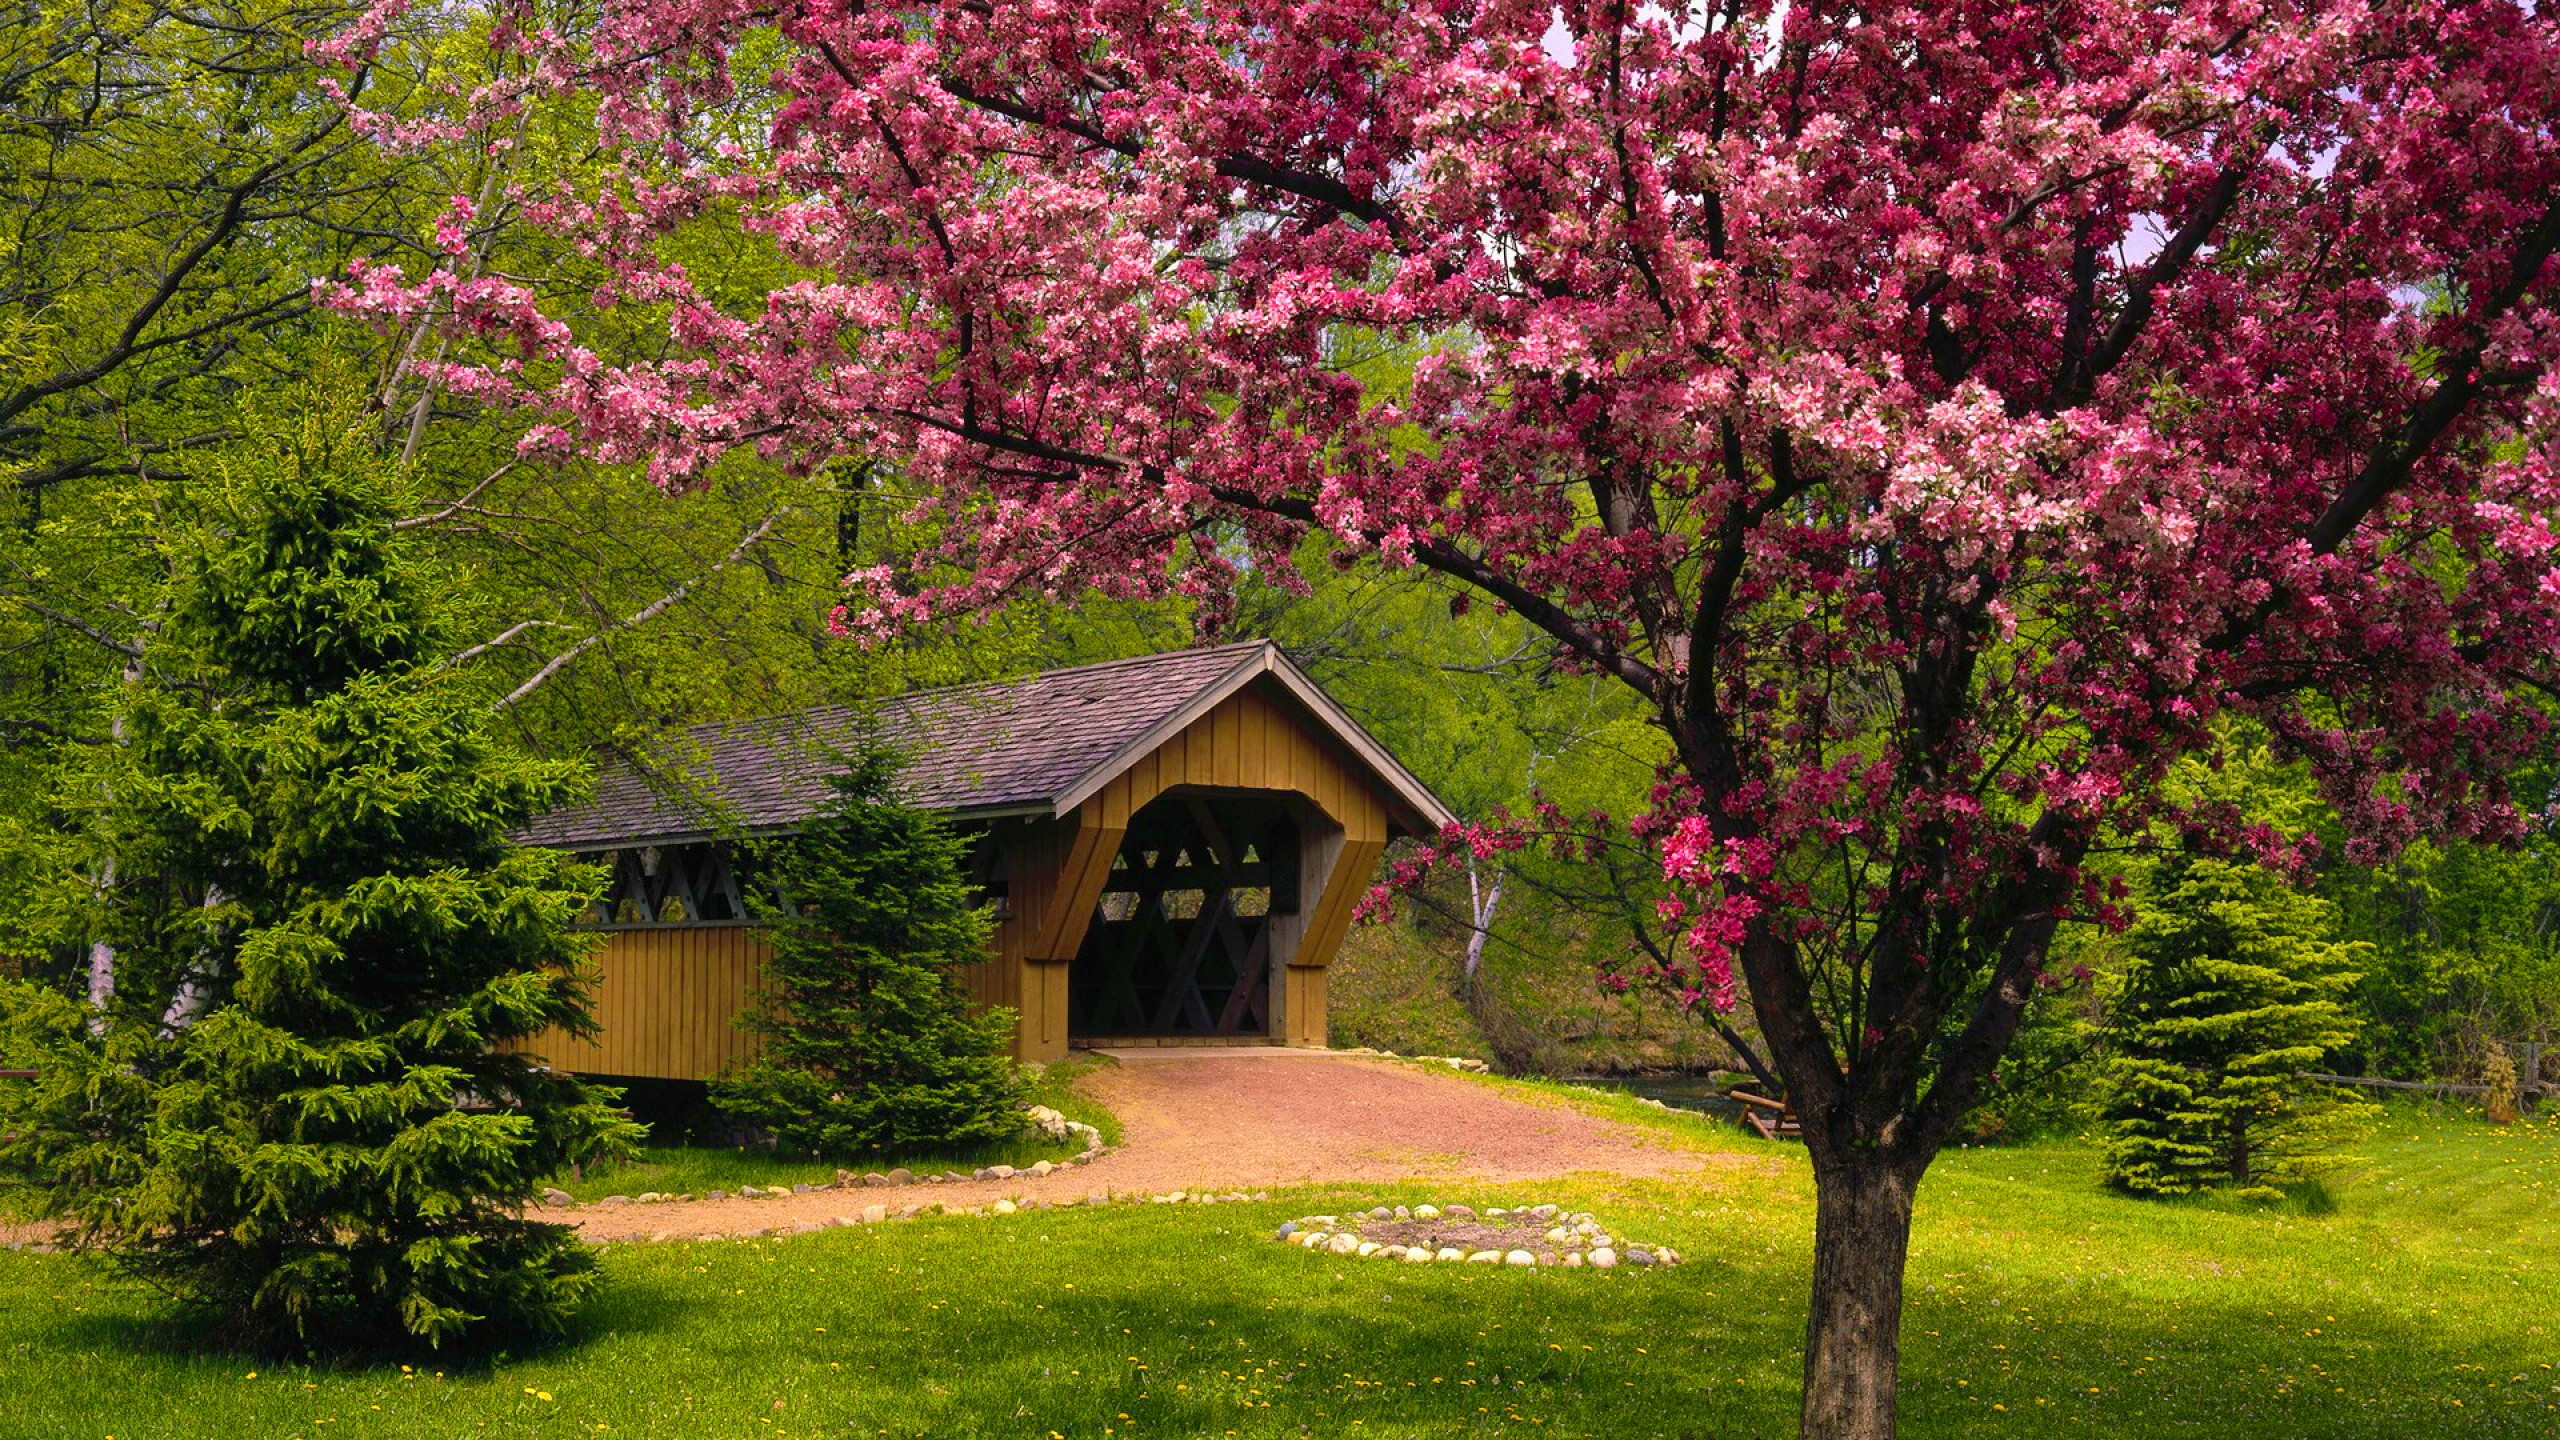 2560x1440 google images springtime wallpaper Covered Bridge in Springtime Full HD  Wallpaper and Background Image  ID